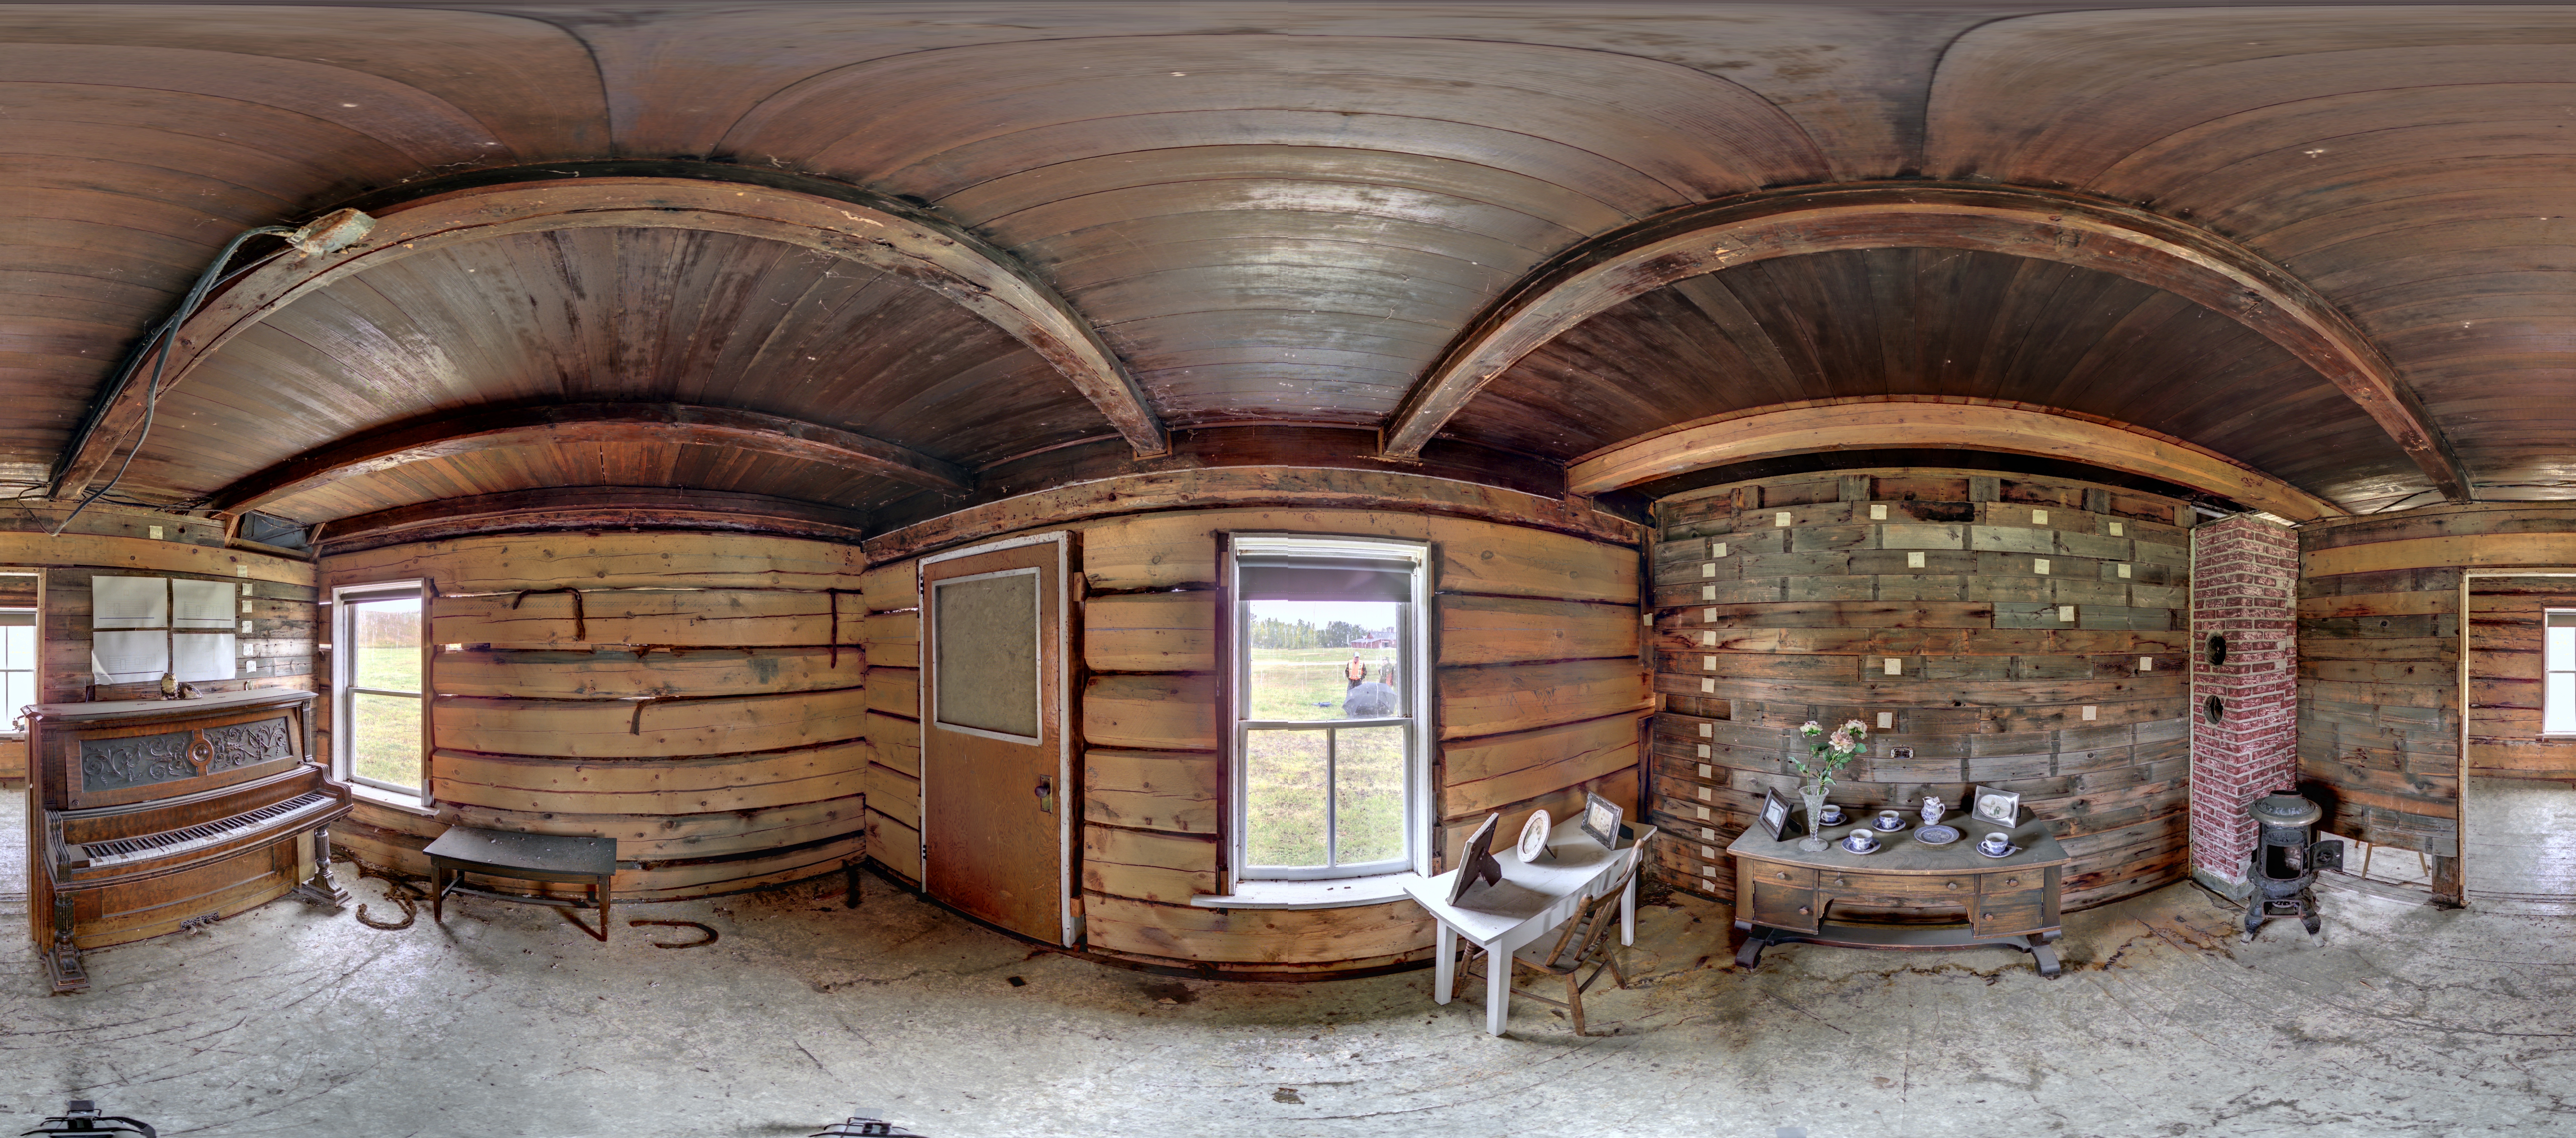 Panoramic image of scanning location 7 of the interior of the Foreman's House at Bar U Ranch